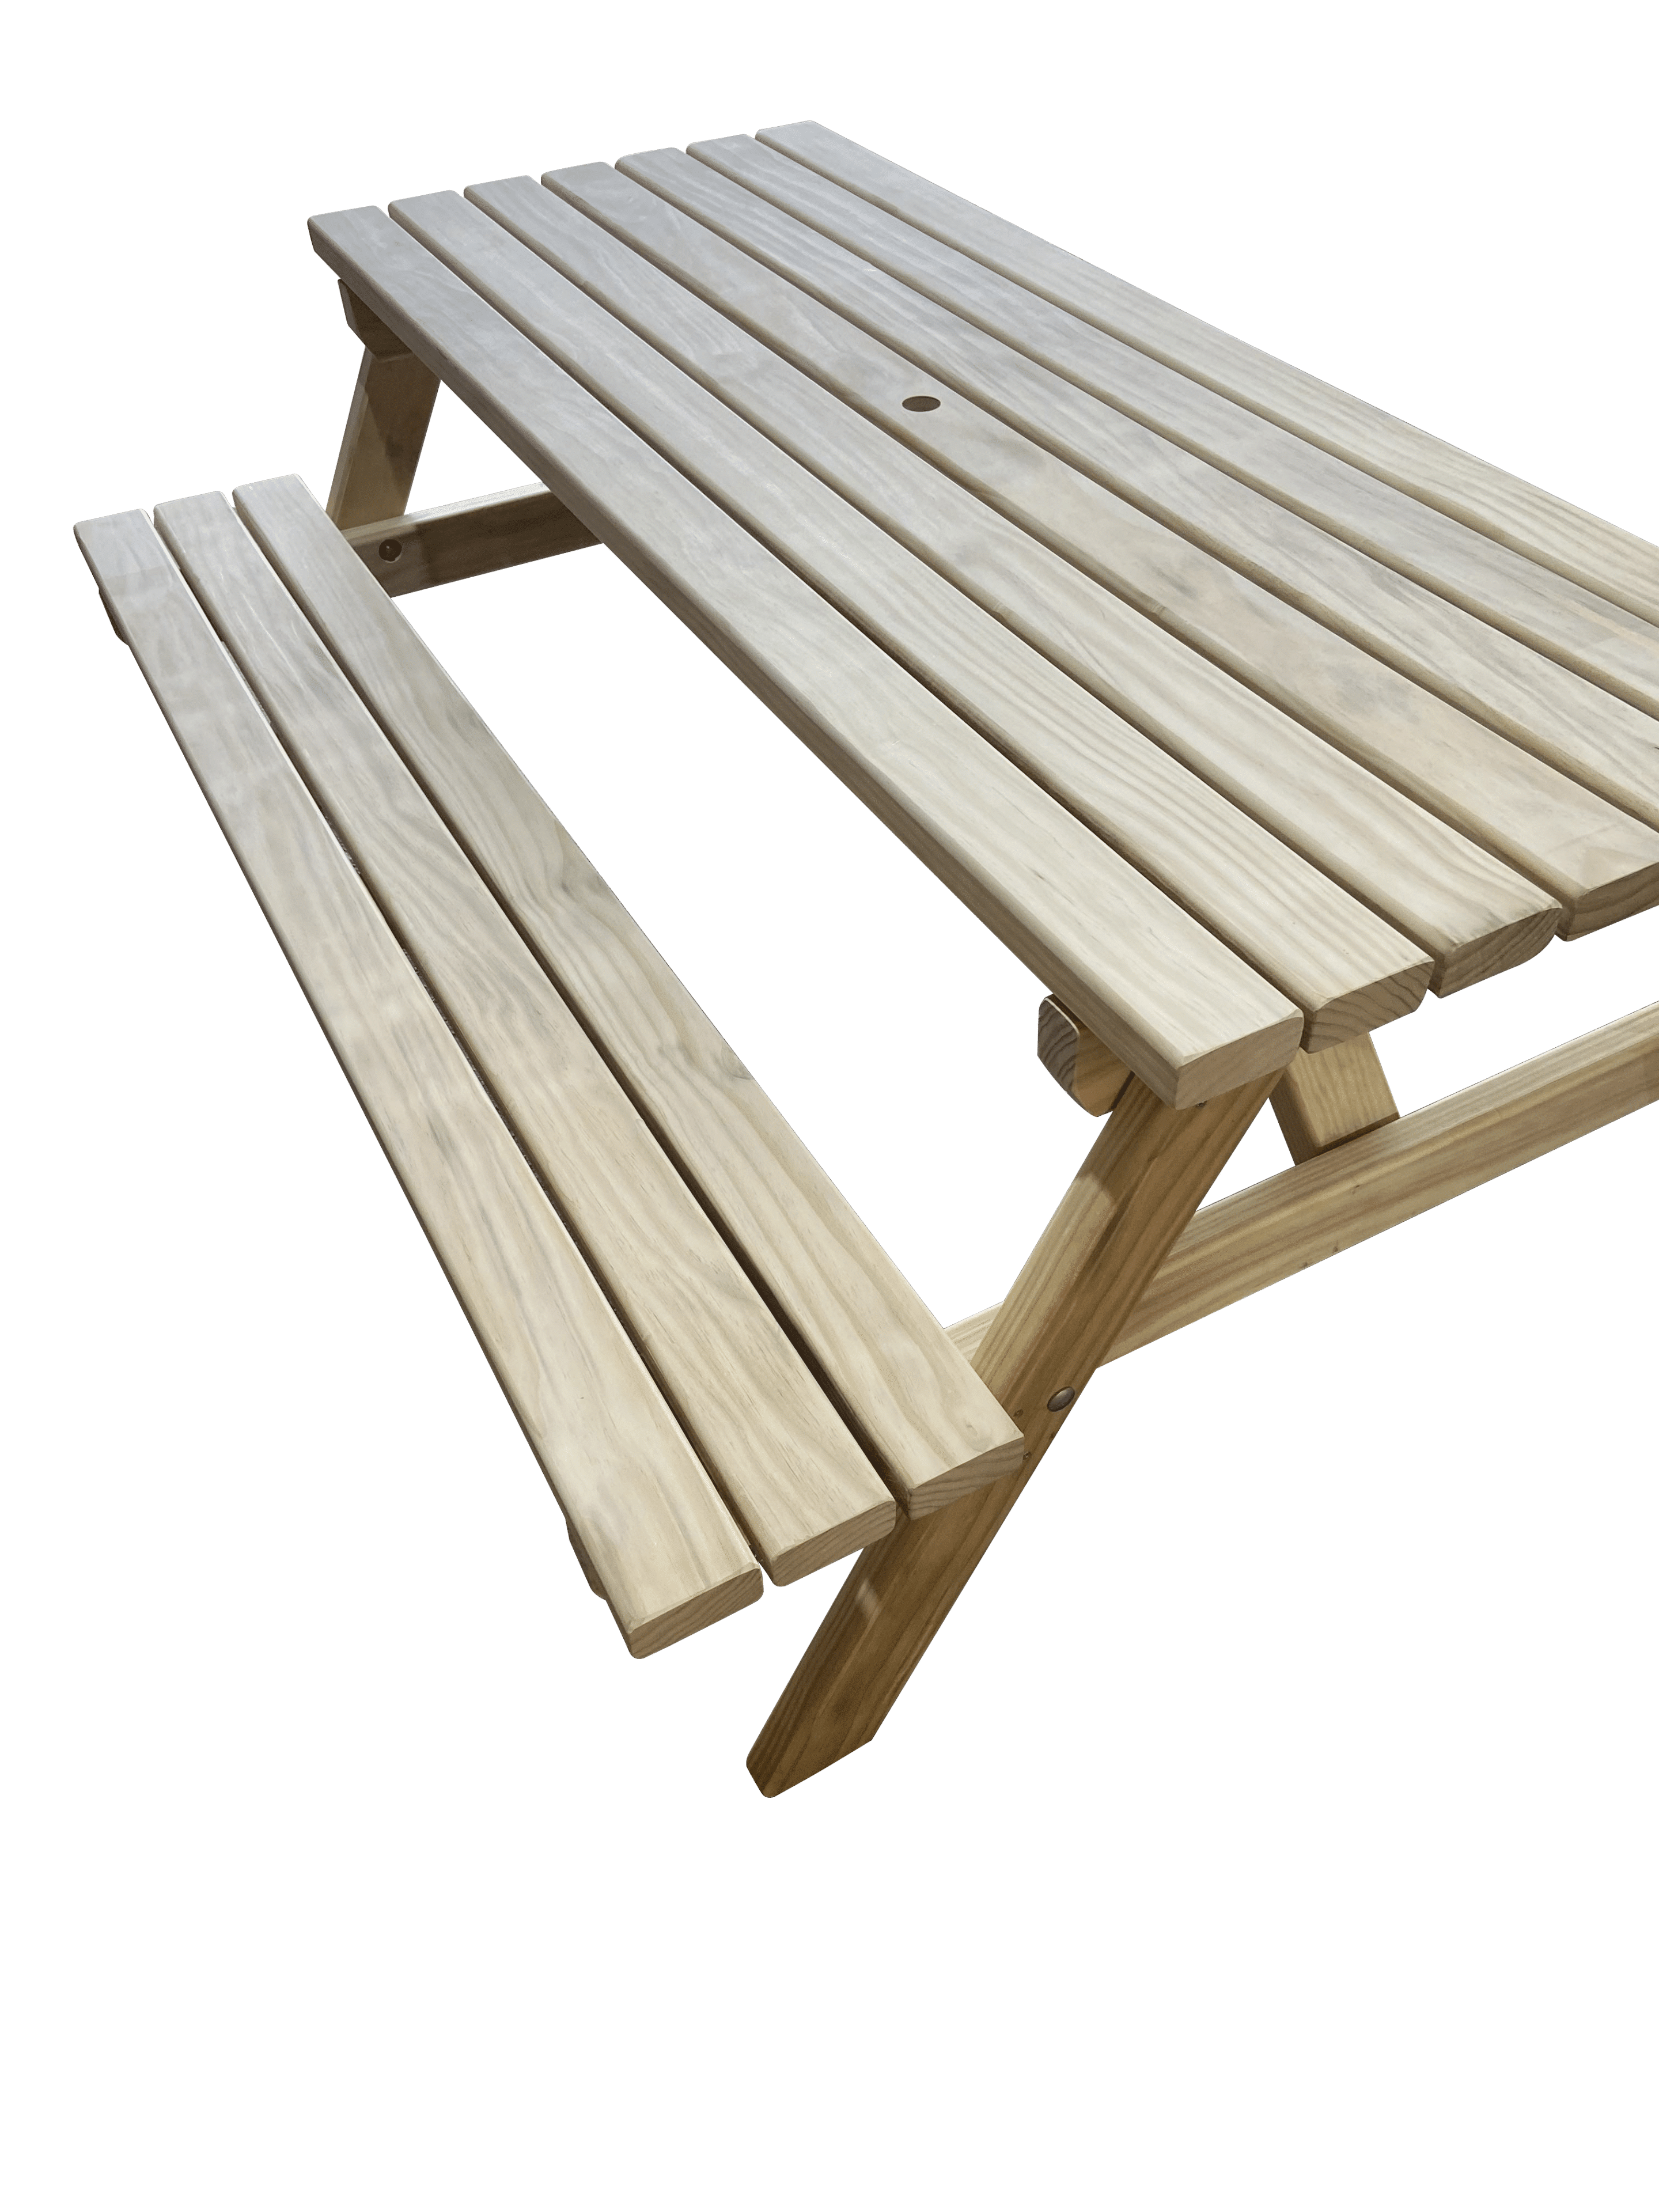 Rounded Corners MG Timber Heavy Duty 4FT Wooden Picnic Table and Benches Set 